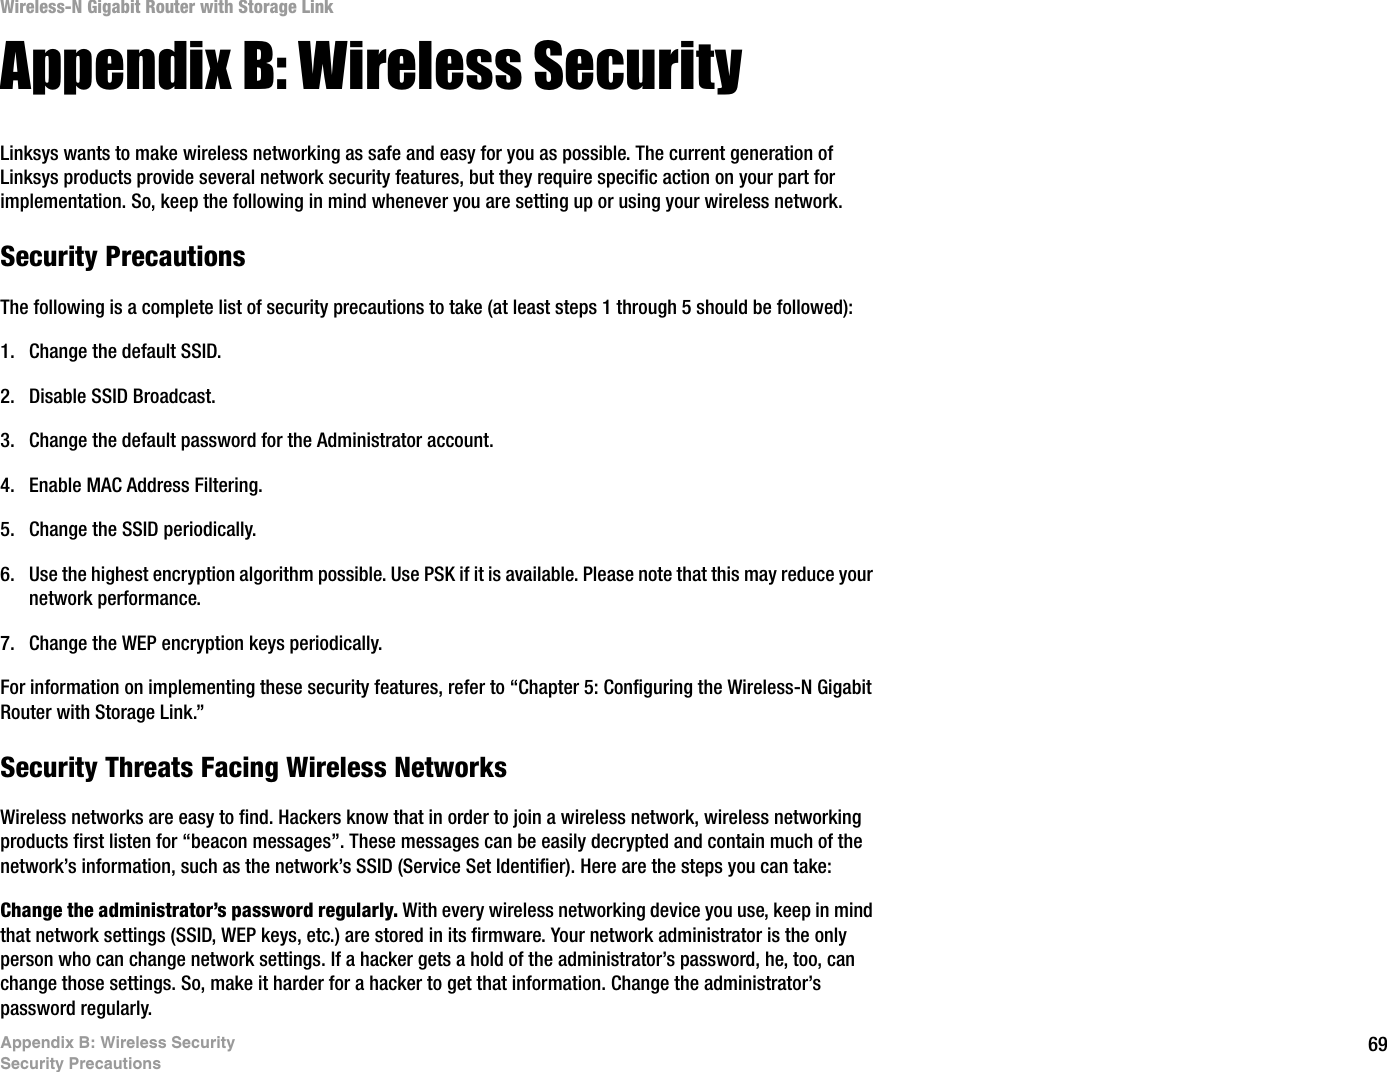 69Appendix B: Wireless SecuritySecurity PrecautionsWireless-N Gigabit Router with Storage LinkAppendix B: Wireless SecurityLinksys wants to make wireless networking as safe and easy for you as possible. The current generation of Linksys products provide several network security features, but they require specific action on your part for implementation. So, keep the following in mind whenever you are setting up or using your wireless network.Security PrecautionsThe following is a complete list of security precautions to take (at least steps 1 through 5 should be followed):1. Change the default SSID. 2. Disable SSID Broadcast. 3. Change the default password for the Administrator account. 4. Enable MAC Address Filtering. 5. Change the SSID periodically. 6. Use the highest encryption algorithm possible. Use PSK if it is available. Please note that this may reduce your network performance. 7. Change the WEP encryption keys periodically. For information on implementing these security features, refer to “Chapter 5: Configuring the Wireless-N Gigabit Router with Storage Link.”Security Threats Facing Wireless Networks Wireless networks are easy to find. Hackers know that in order to join a wireless network, wireless networking products first listen for “beacon messages”. These messages can be easily decrypted and contain much of the network’s information, such as the network’s SSID (Service Set Identifier). Here are the steps you can take:Change the administrator’s password regularly. With every wireless networking device you use, keep in mind that network settings (SSID, WEP keys, etc.) are stored in its firmware. Your network administrator is the only person who can change network settings. If a hacker gets a hold of the administrator’s password, he, too, can change those settings. So, make it harder for a hacker to get that information. Change the administrator’s password regularly.